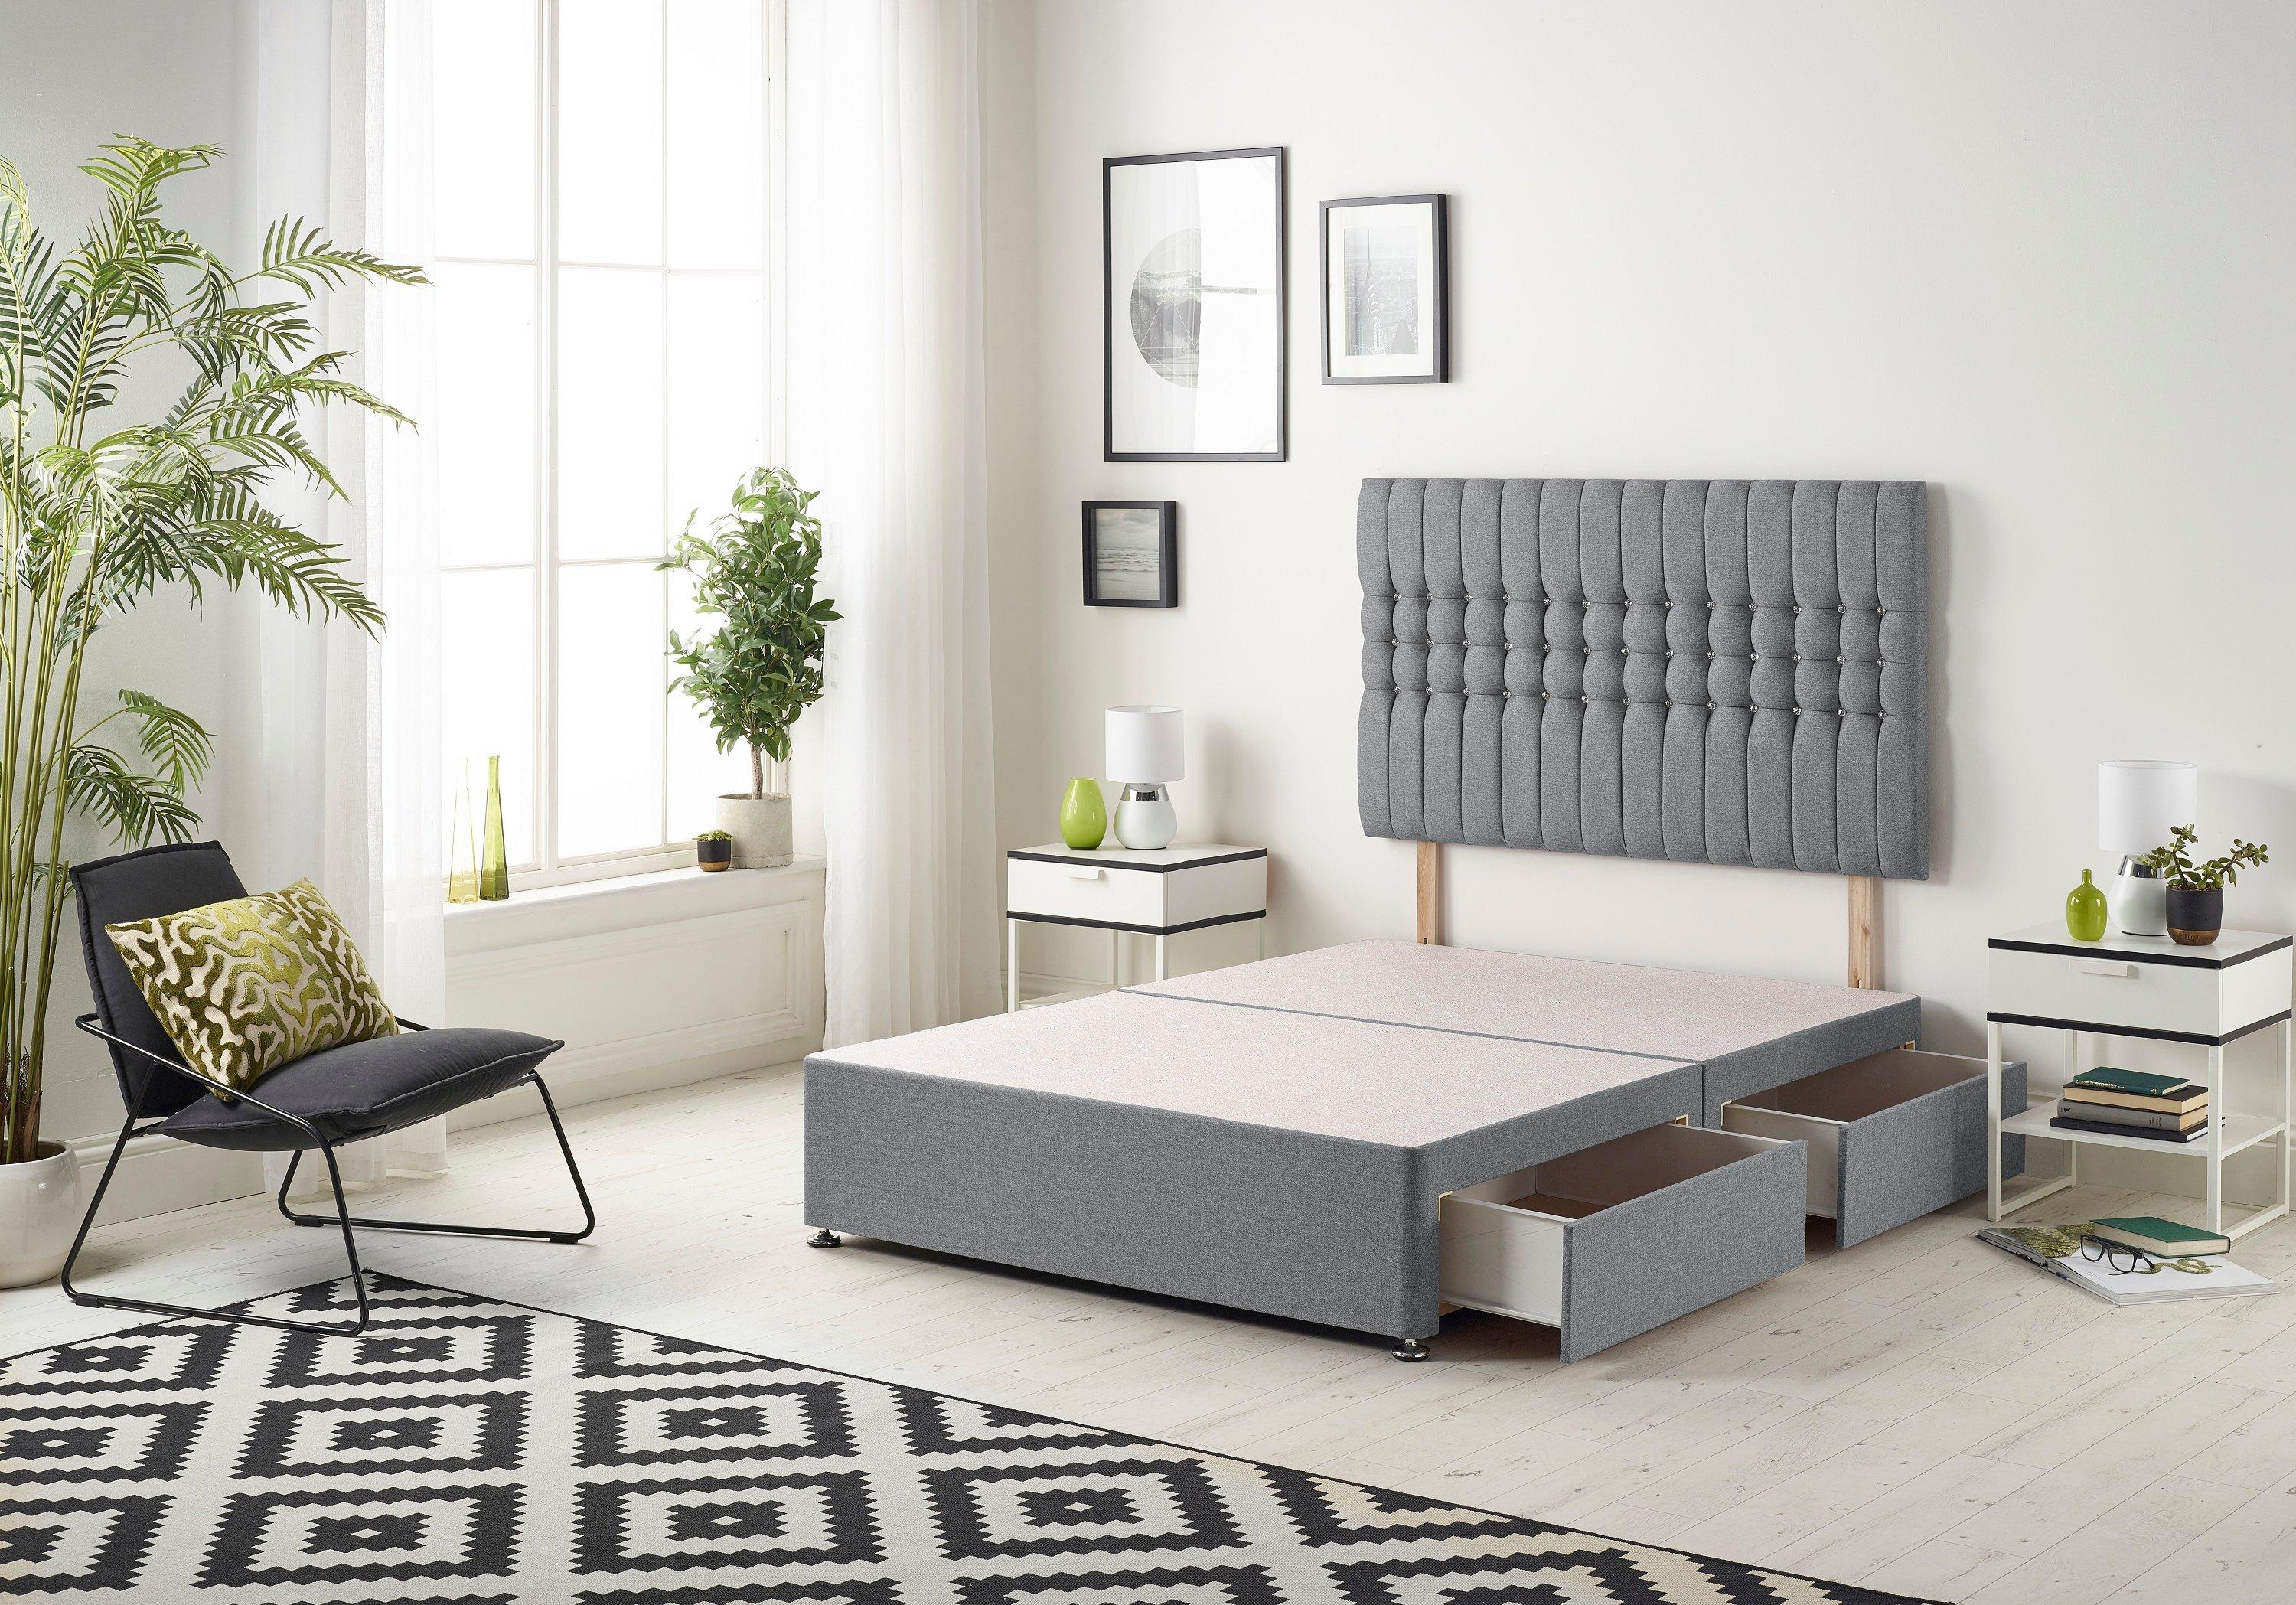 Galaxy Divan Bed Base With 2 Drawers and Headboard Plush